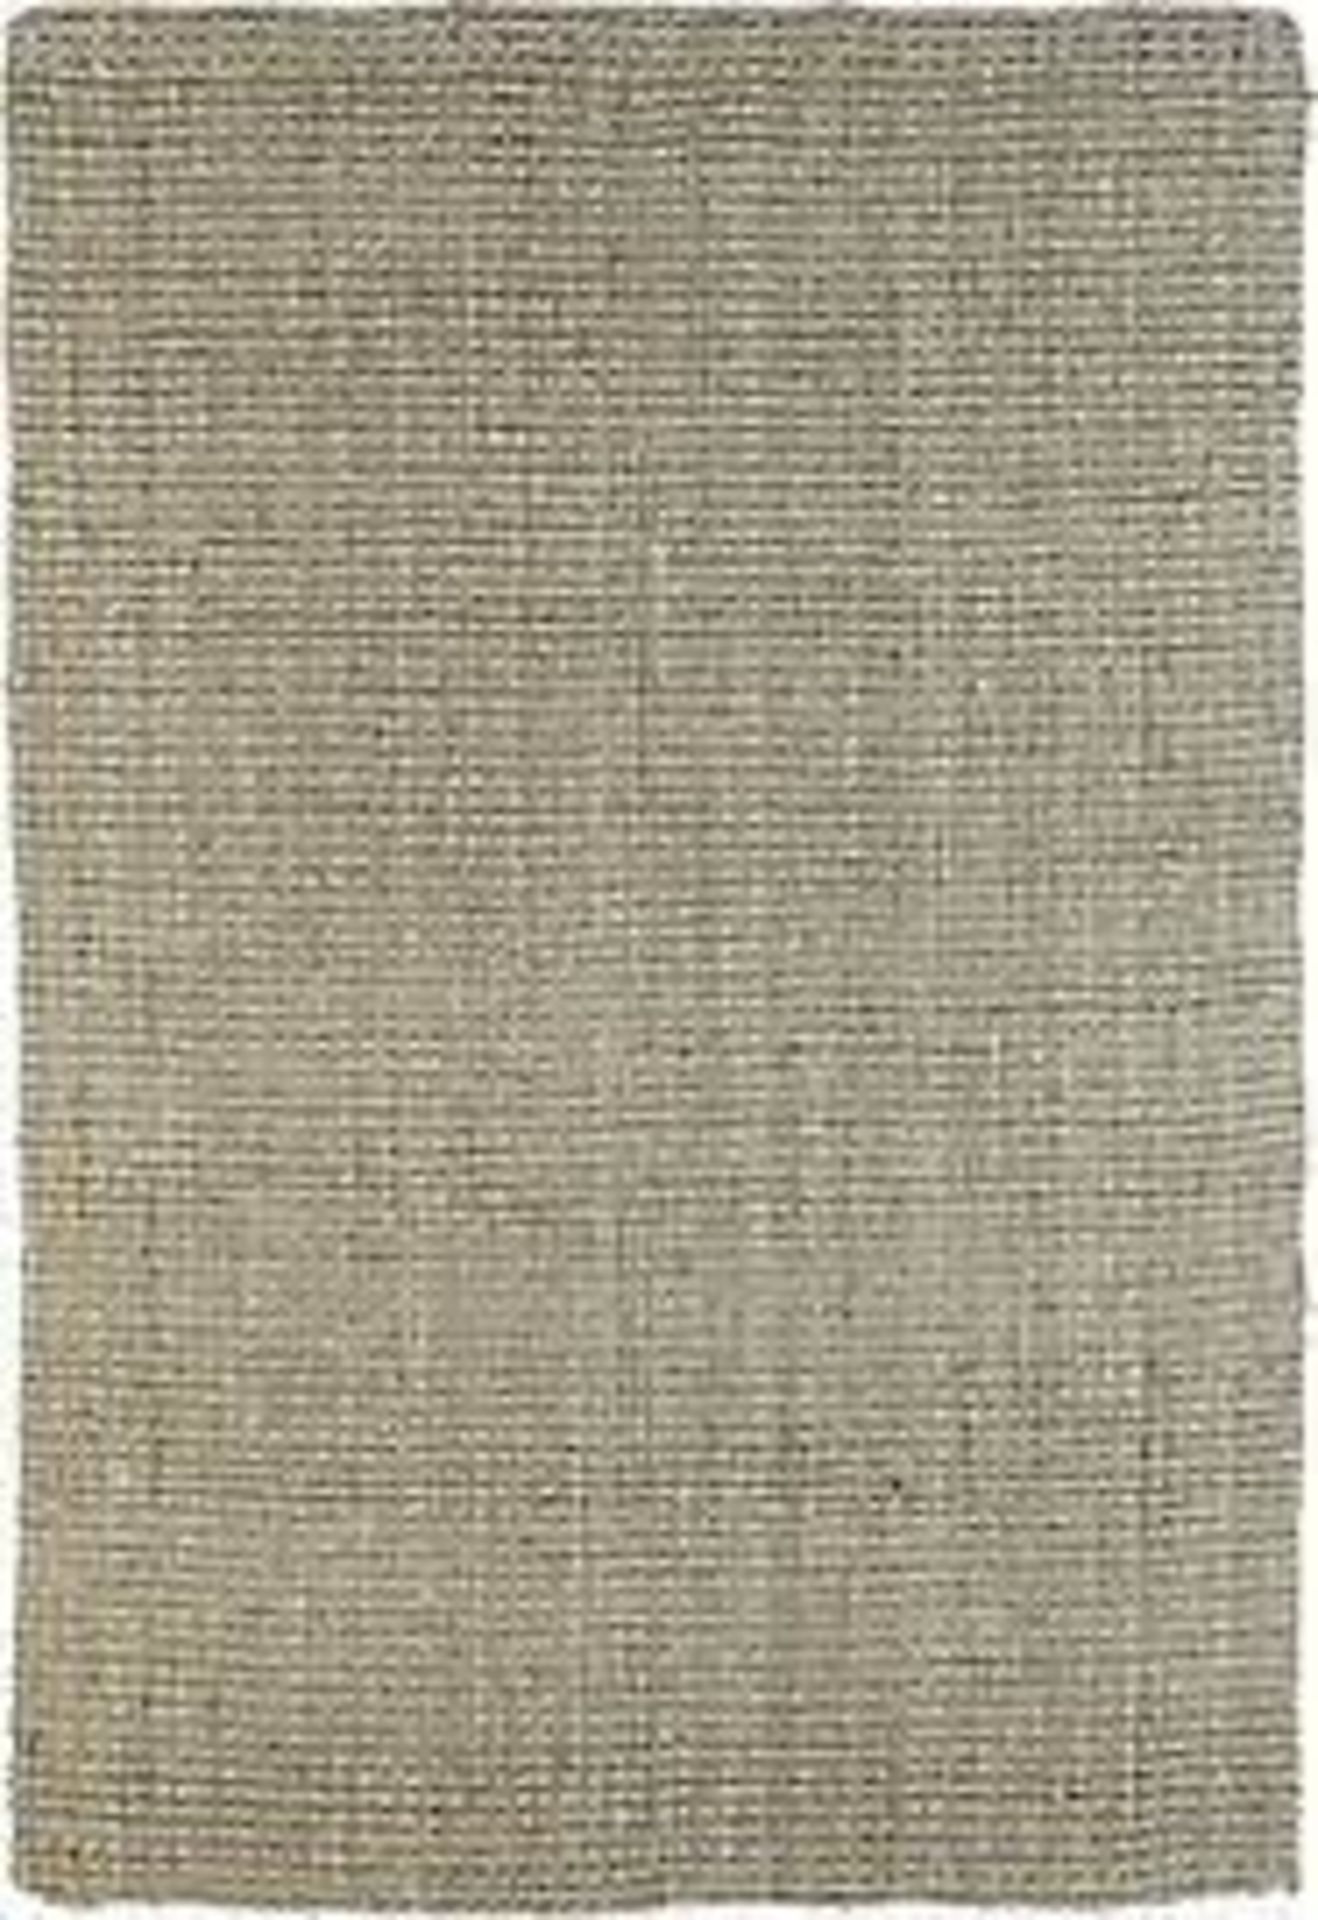 BRAND NEW LOLLIE JUTE WOVEN RUG 1.6 X 2.3M RRP £130 R15